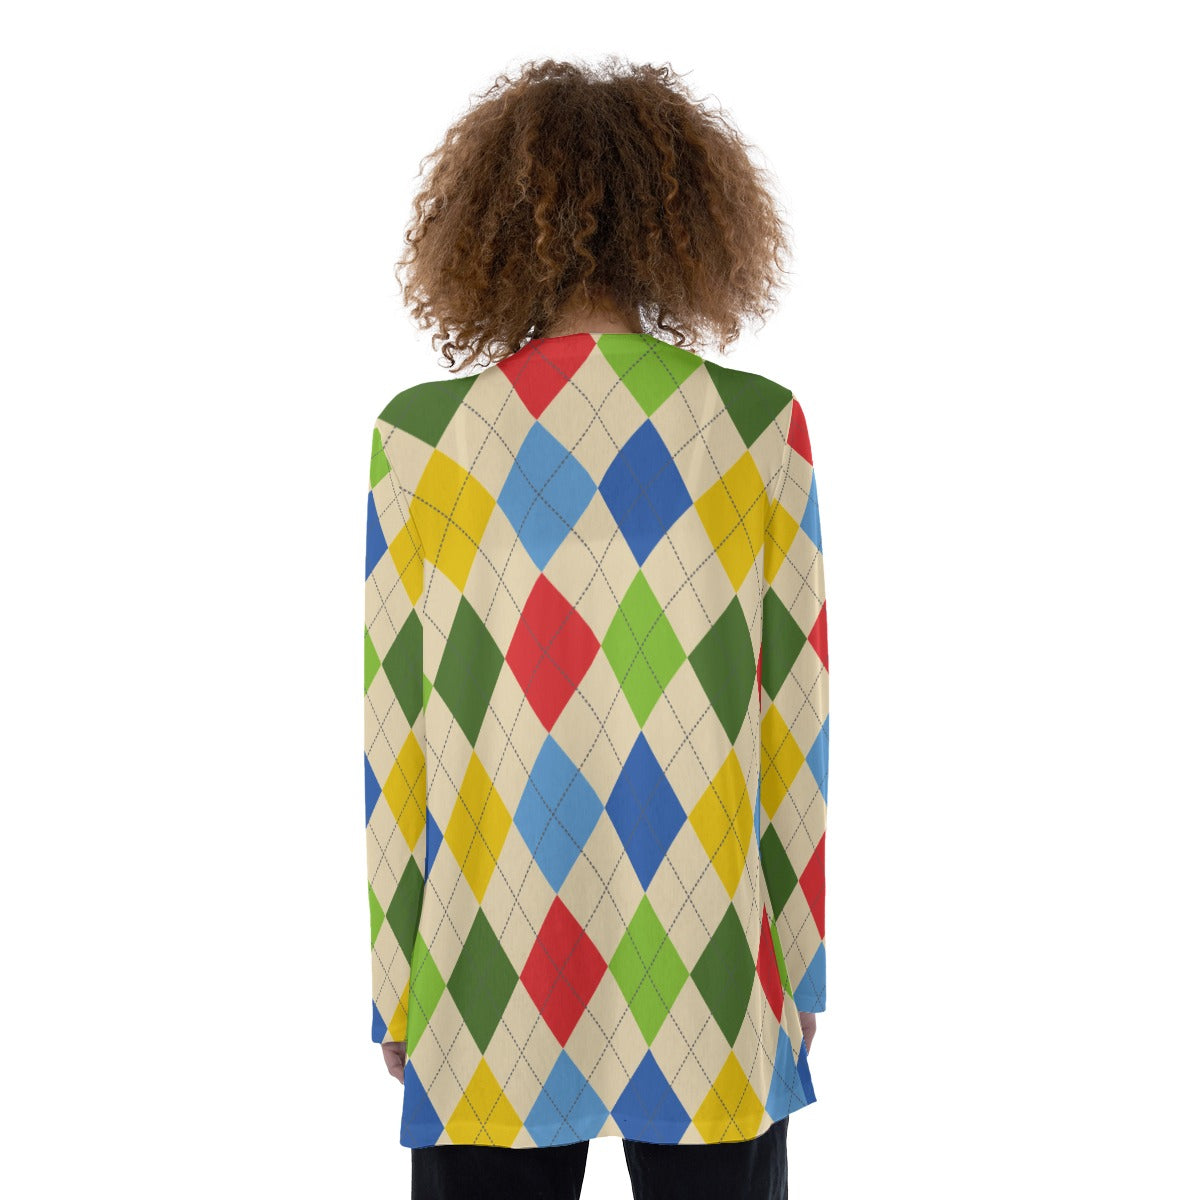 "TAINTED CLOWN" Patch Pocket Cardigan